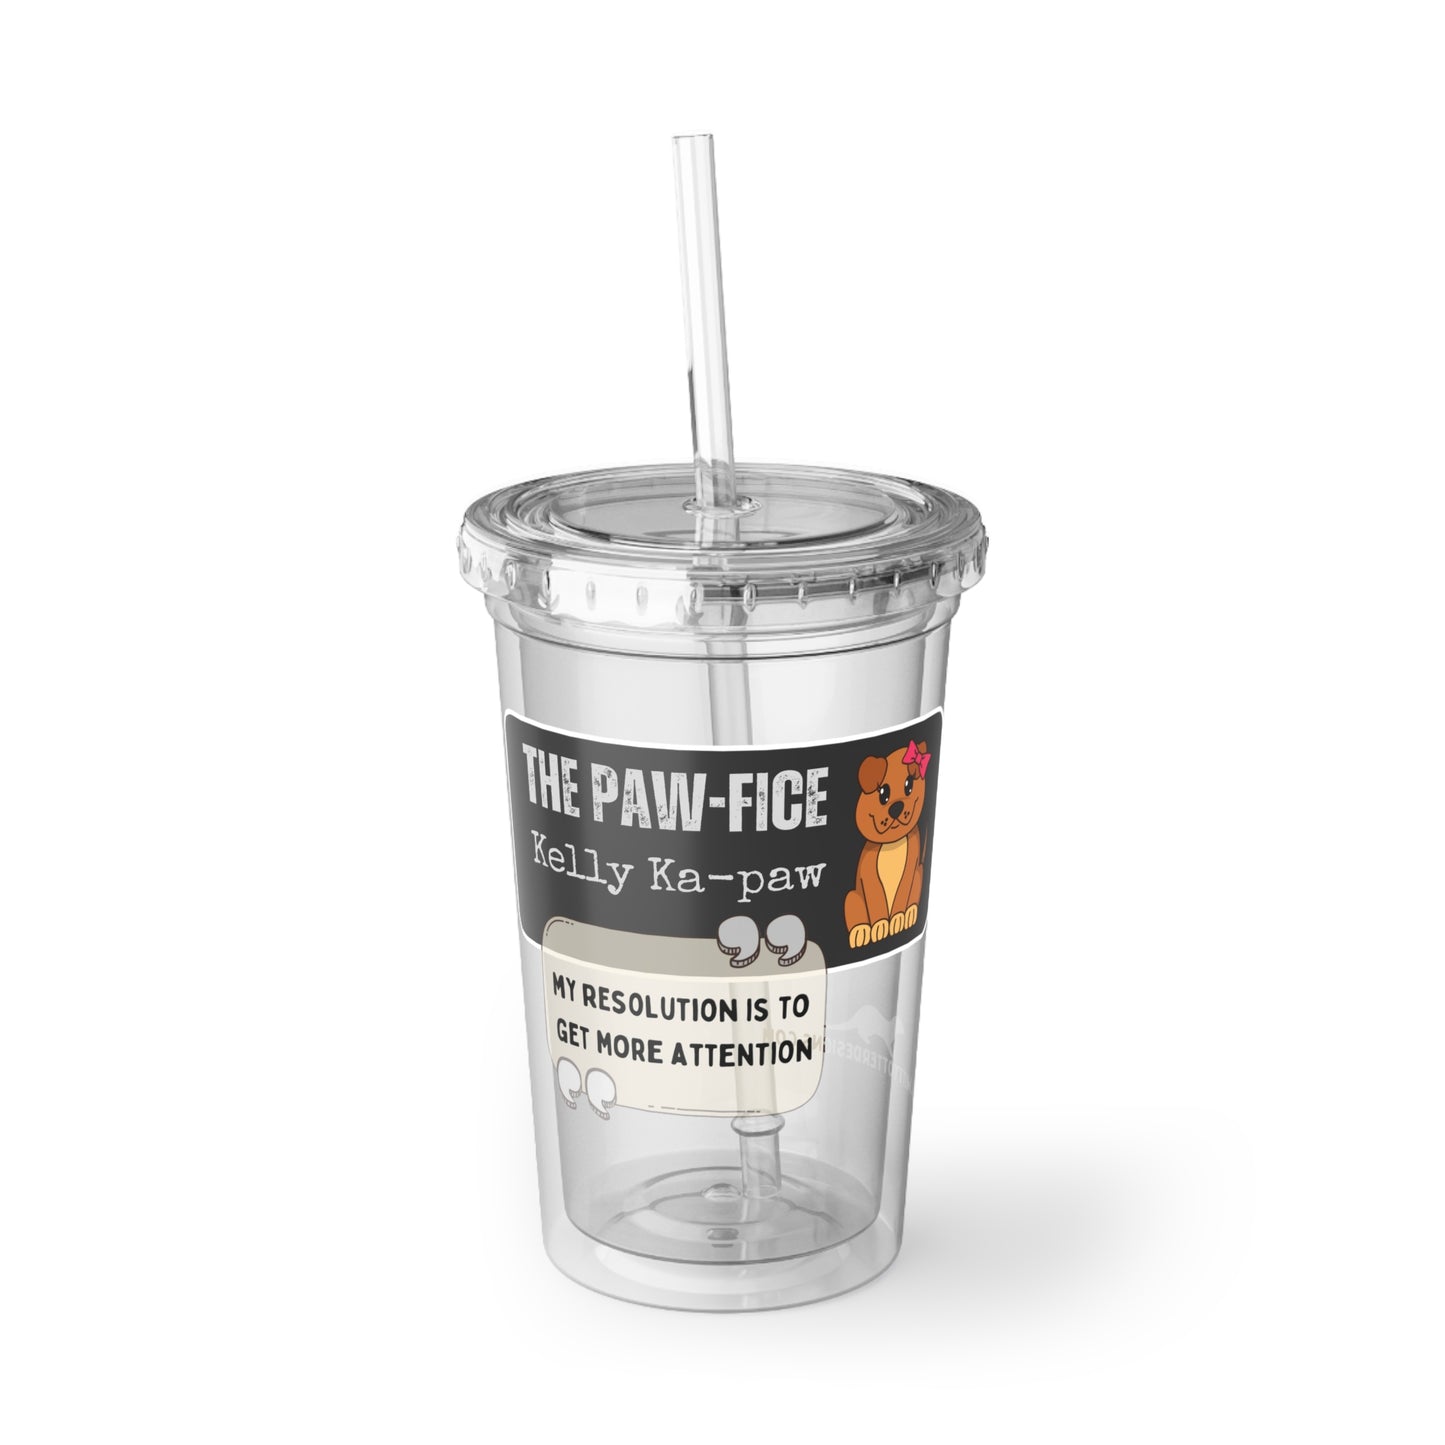 The Office fan *dog edition acrylic cup / Kelly Kapaw, the Paw-fice